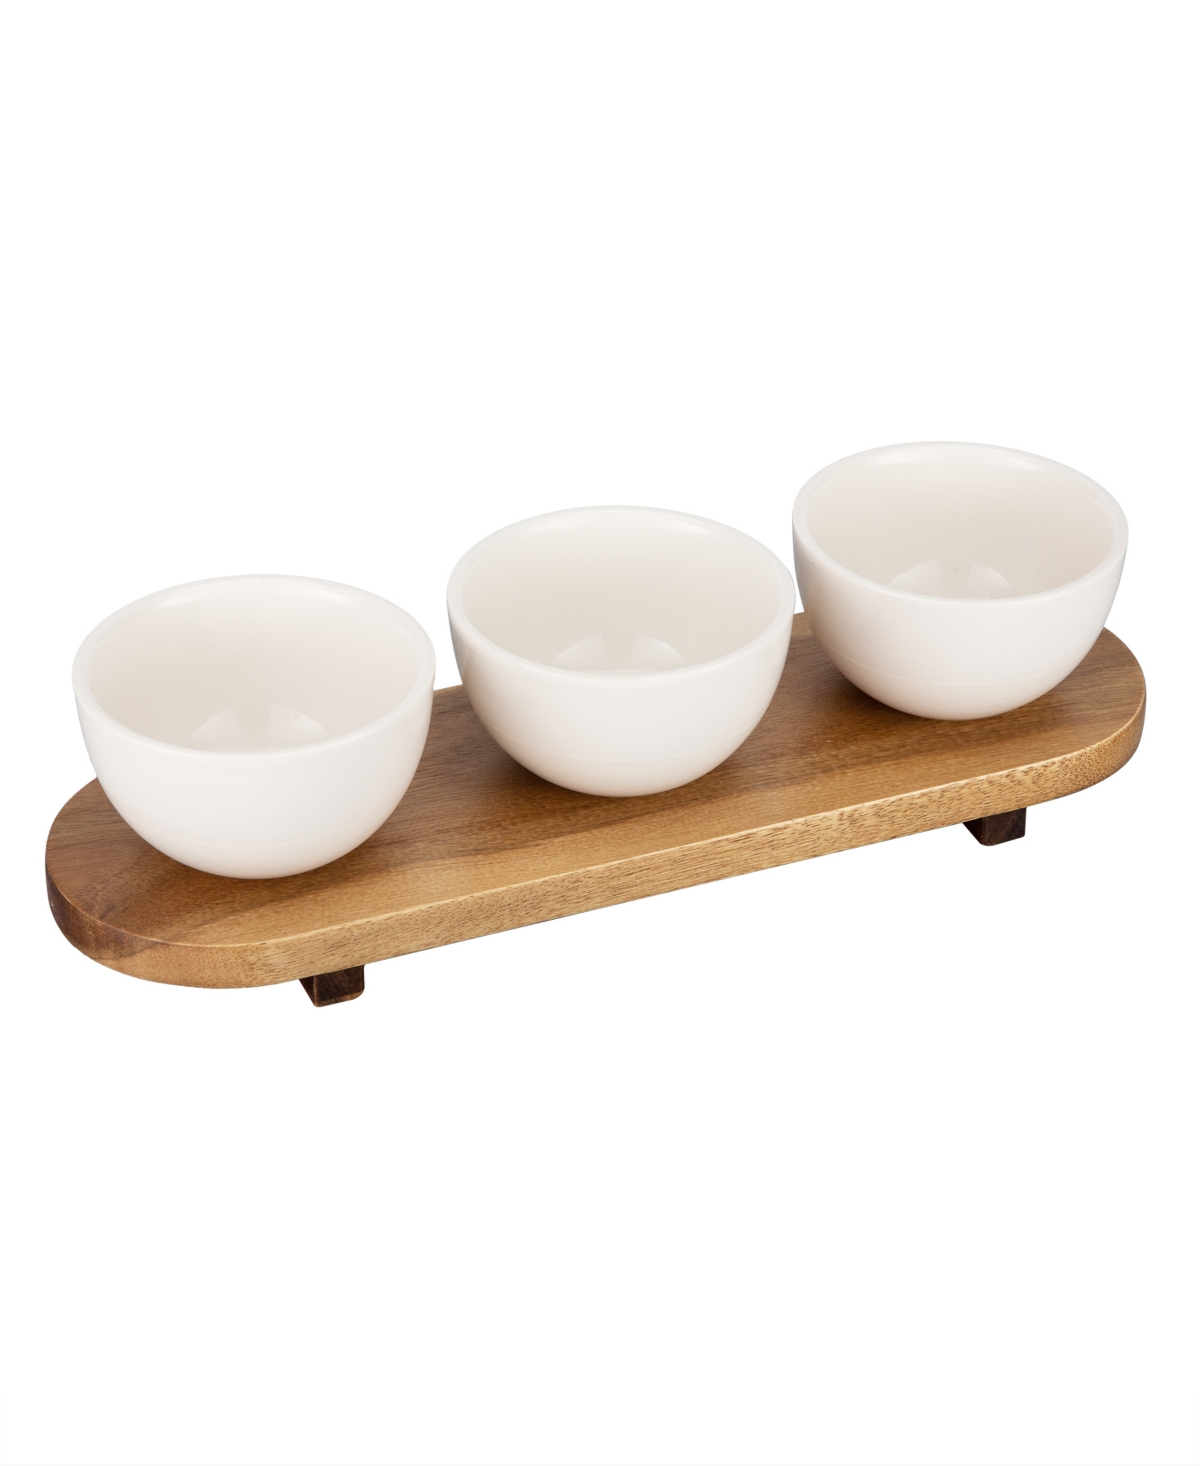 Thirstystone Tray With Condiment Bowls Set, 3 Pieces In White